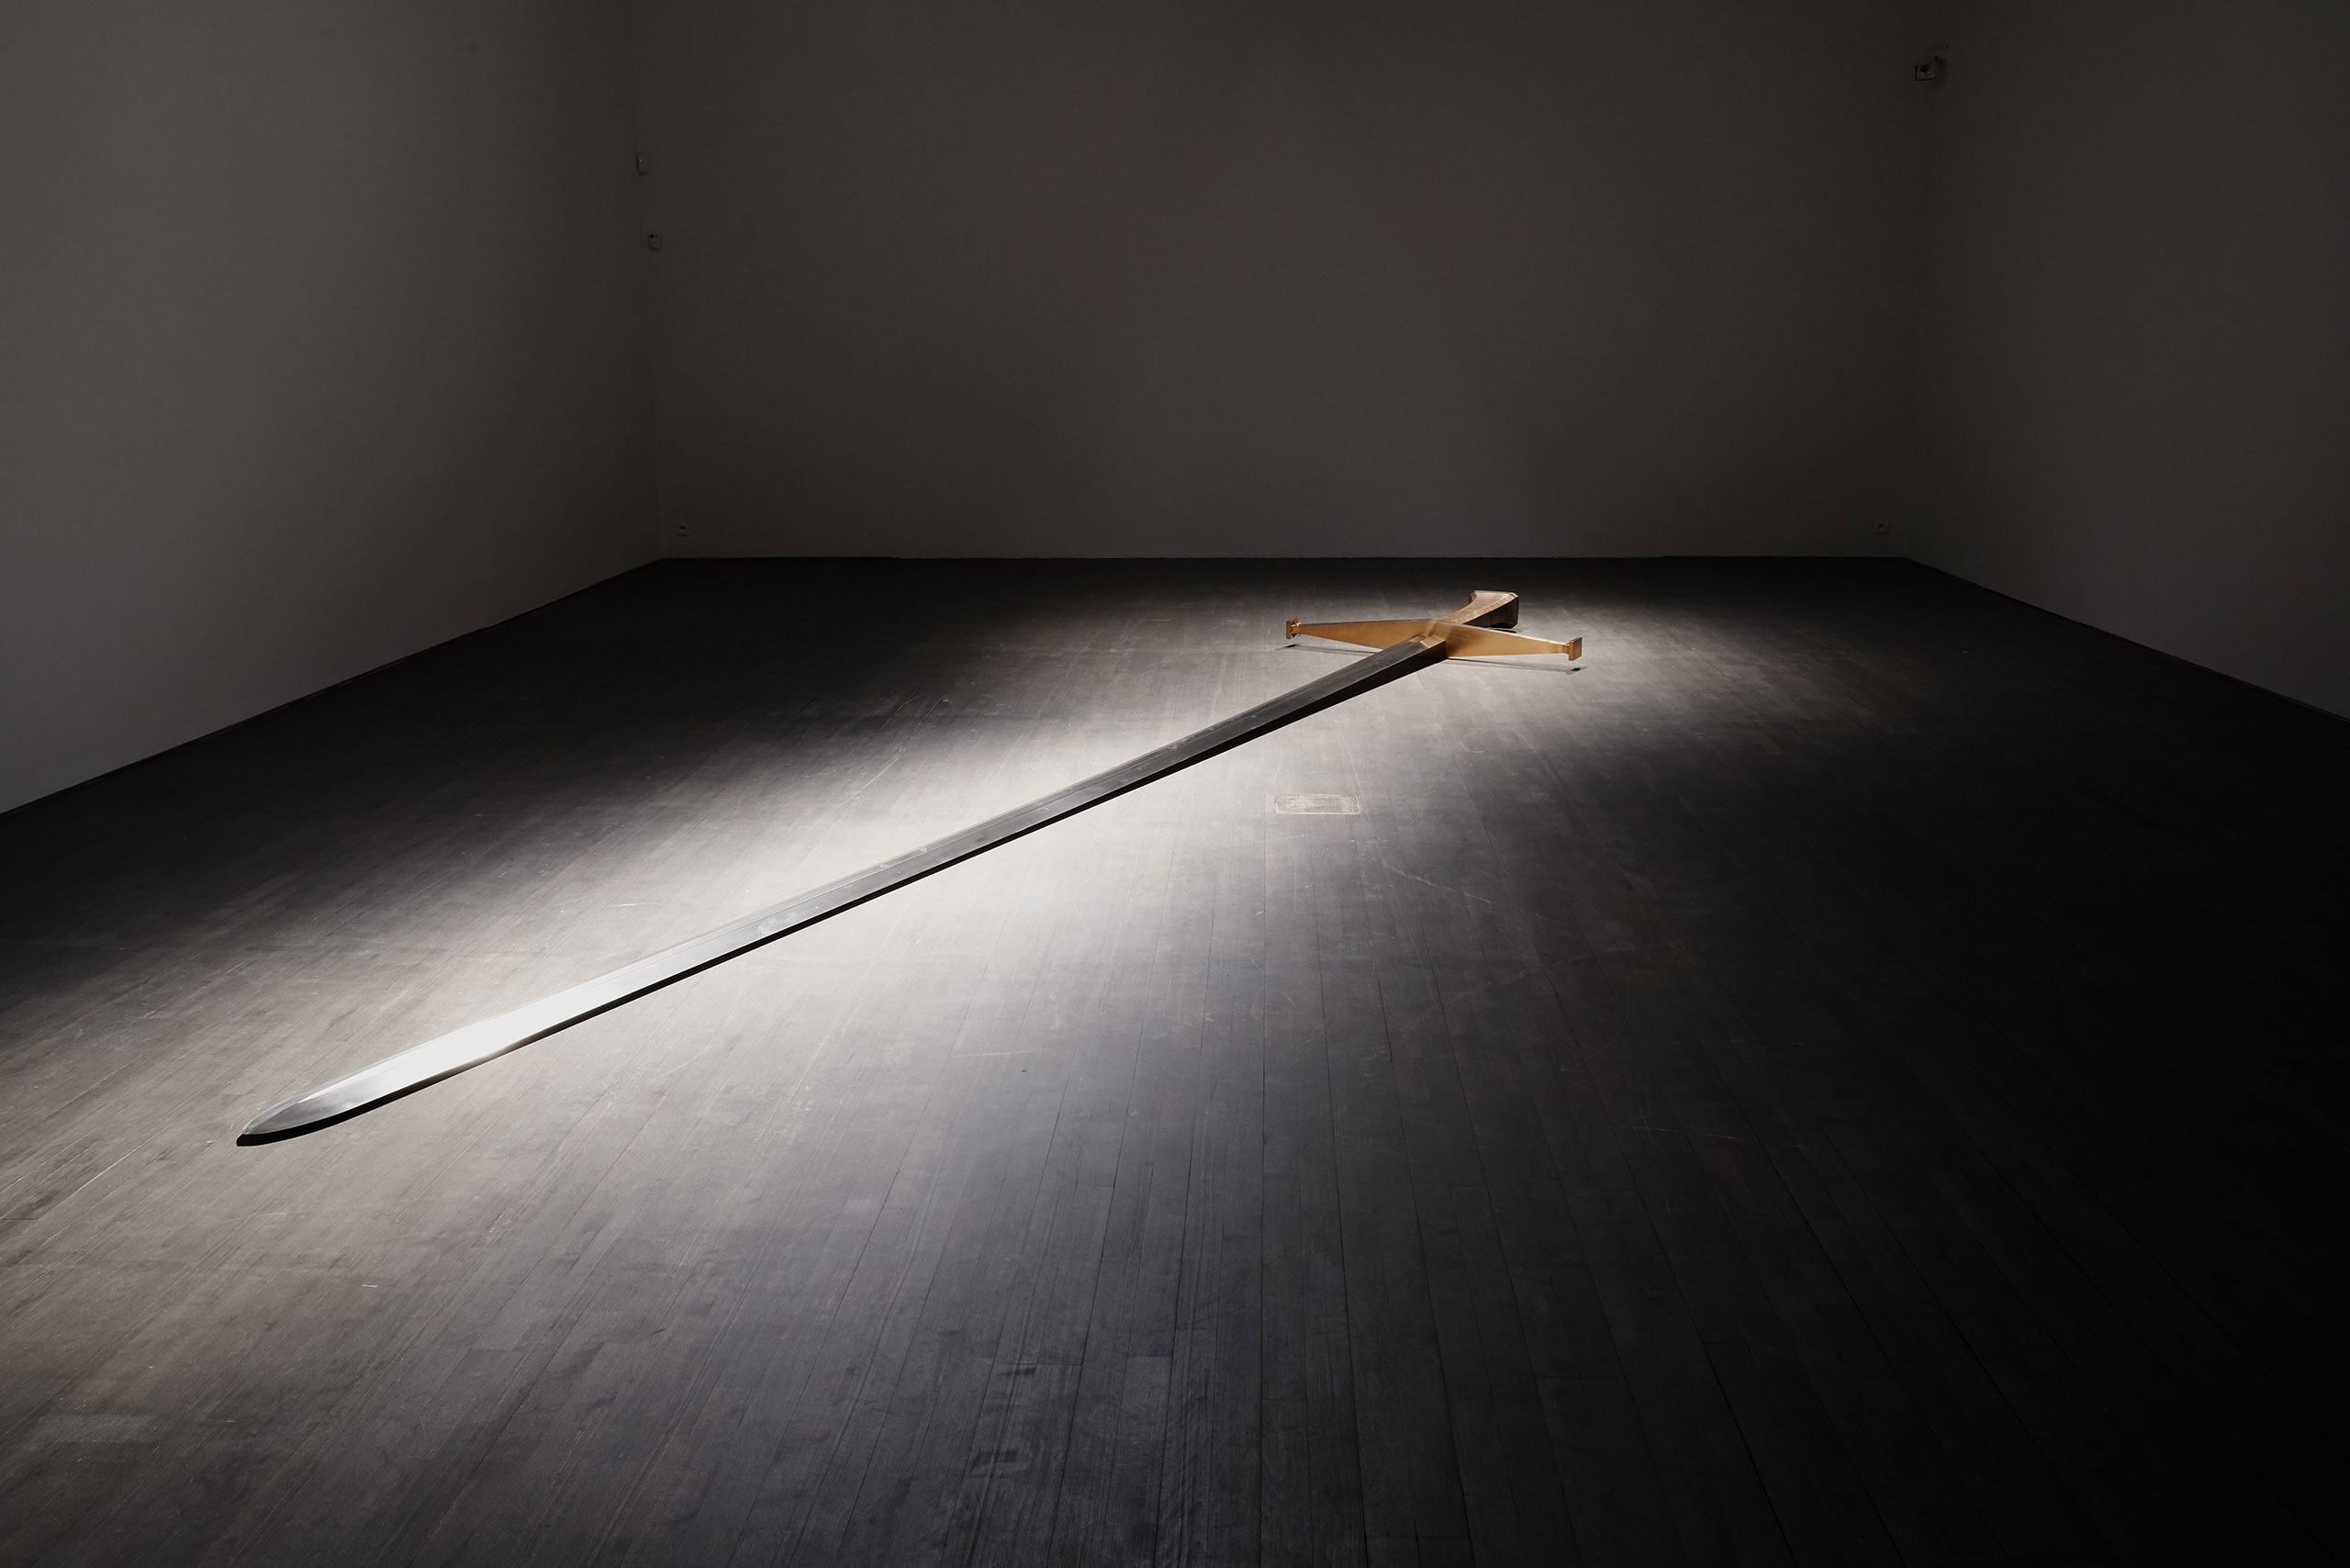 Installation view. Kris Martin, EXIT at S.M.A.K., Ghent, 2020. Photo by Dirk Pauwels.
Featured: Mandi XV, 2007. Steel, bronze. Olbricht Collection.
Artist's statement: This perfectly functional sword is too large for a man. Who is it for?